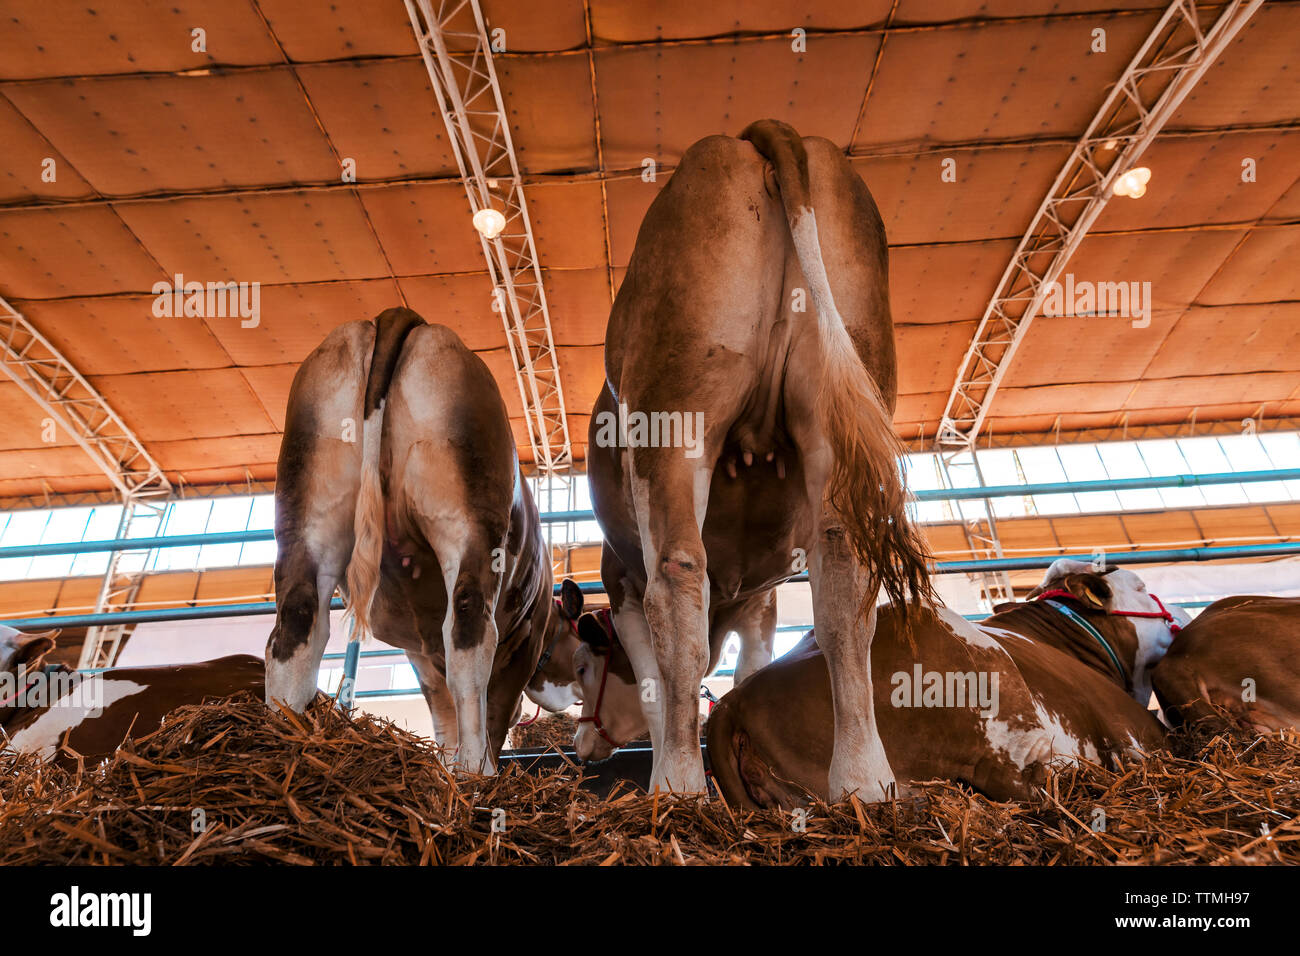 Red holstein cattle on dairy farm, low angle rear view Stock Photo